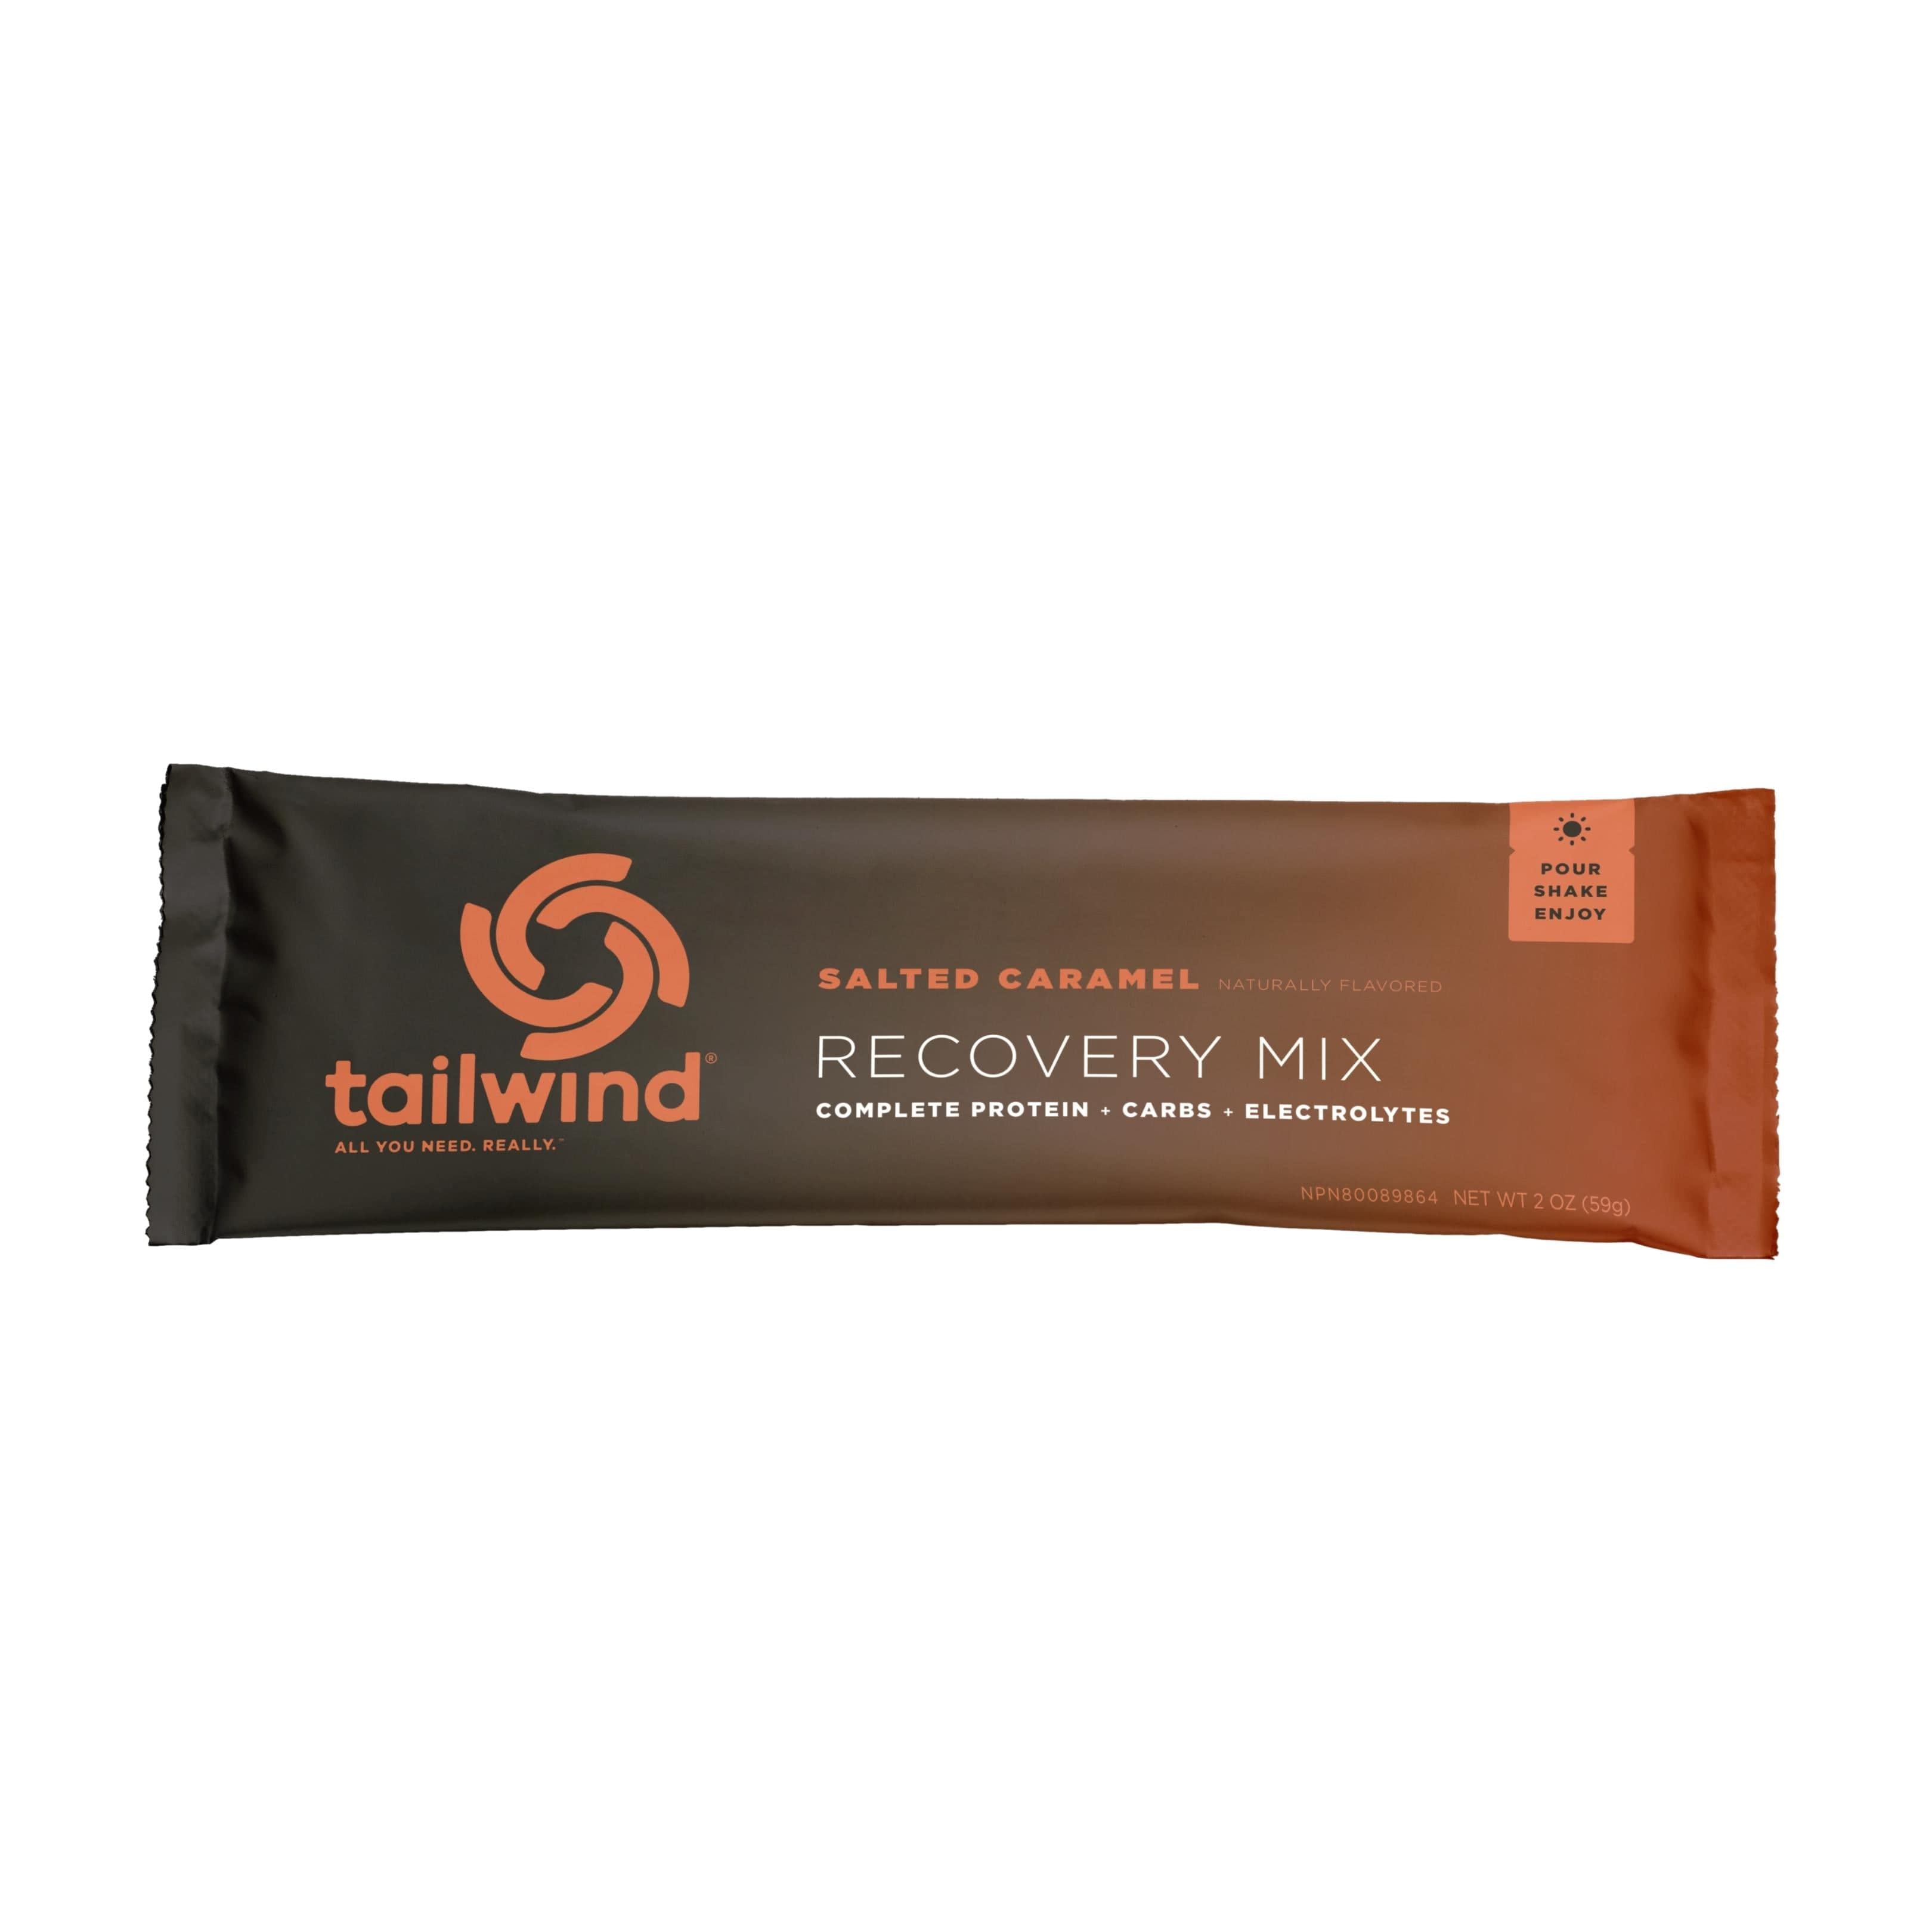 tailwind Nutrition Supplement Stick (2 serve) / Salted Caramel Rebuild Recovery Drink Mix 8 55283 00515 6